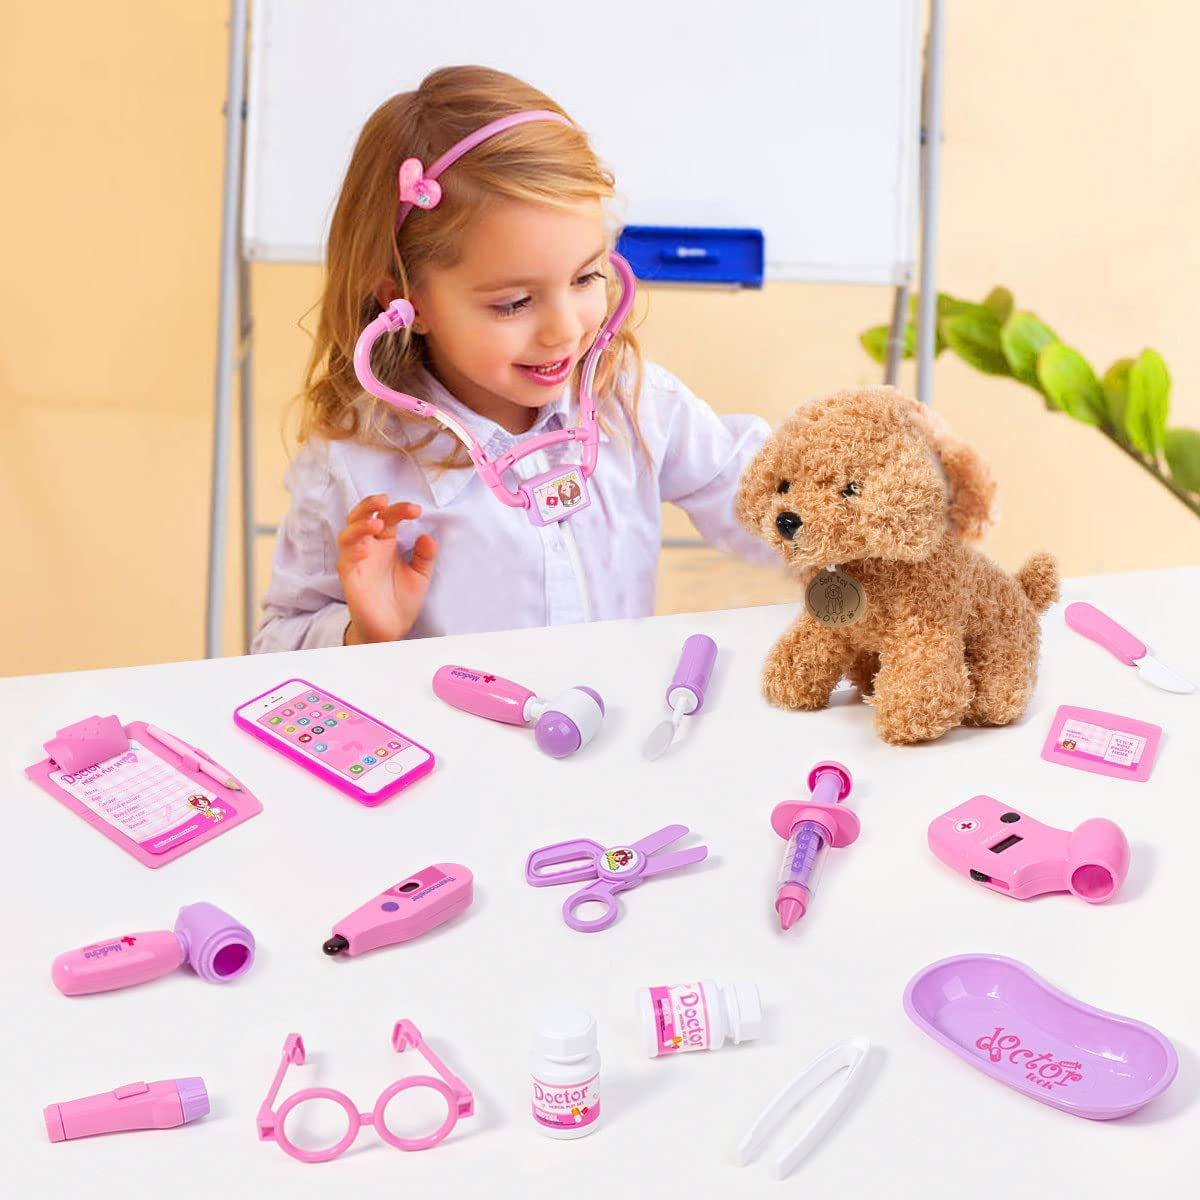 Doctors Set for Kids - Children Pet Vet Care Play Set with Doctor Costume, Plush Dog, Pretend Role Play Medical Kit Toys Gifts for 3 4 5 6 Year Old Toddlers